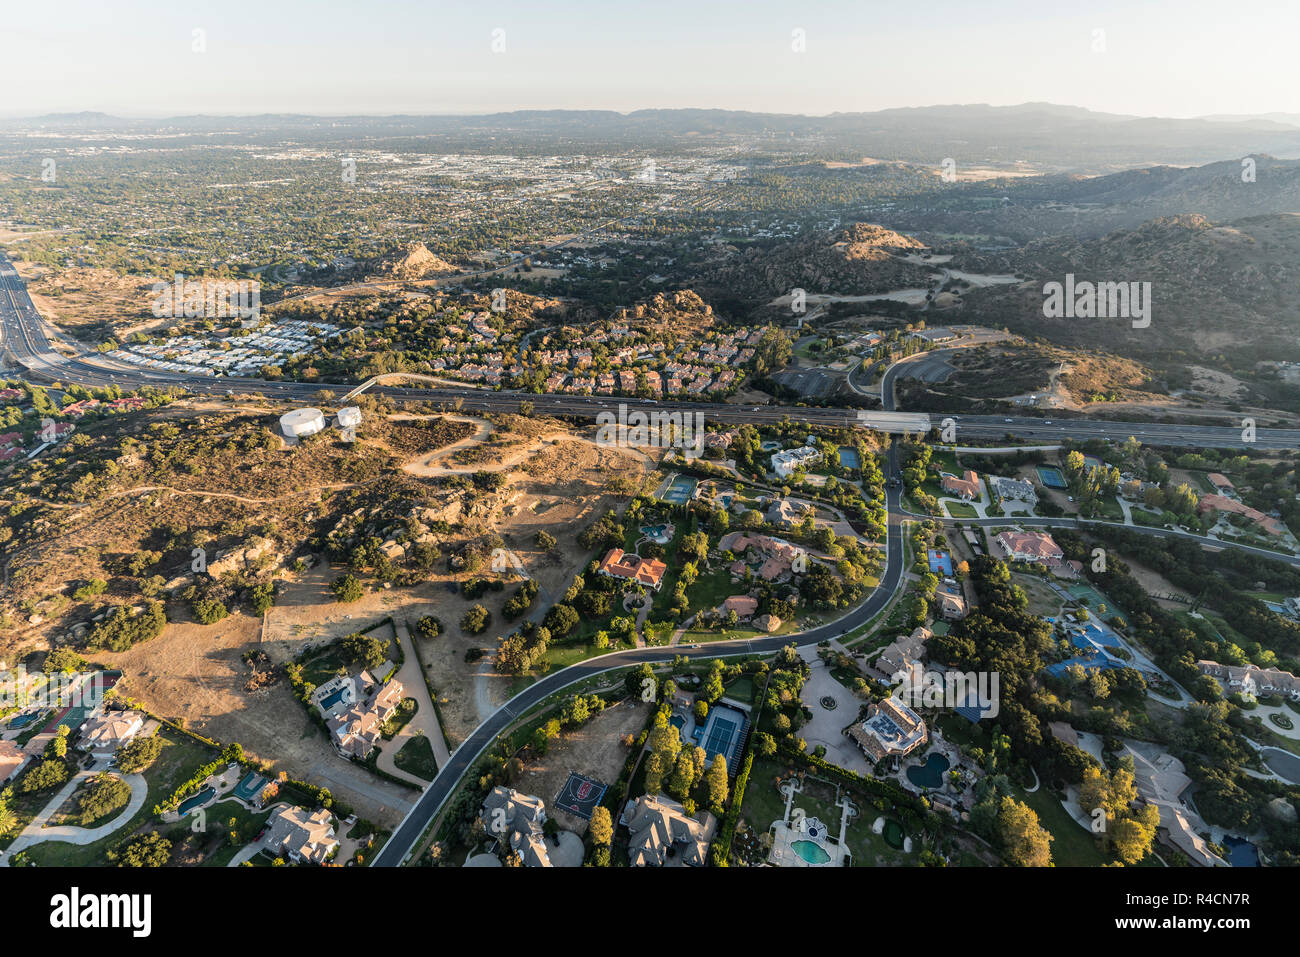 Late afternoon aerial view of homes, estates, mansions and the 118 freeway in the Chatsworth neighborhood of Los Angeles, California. Stock Photo